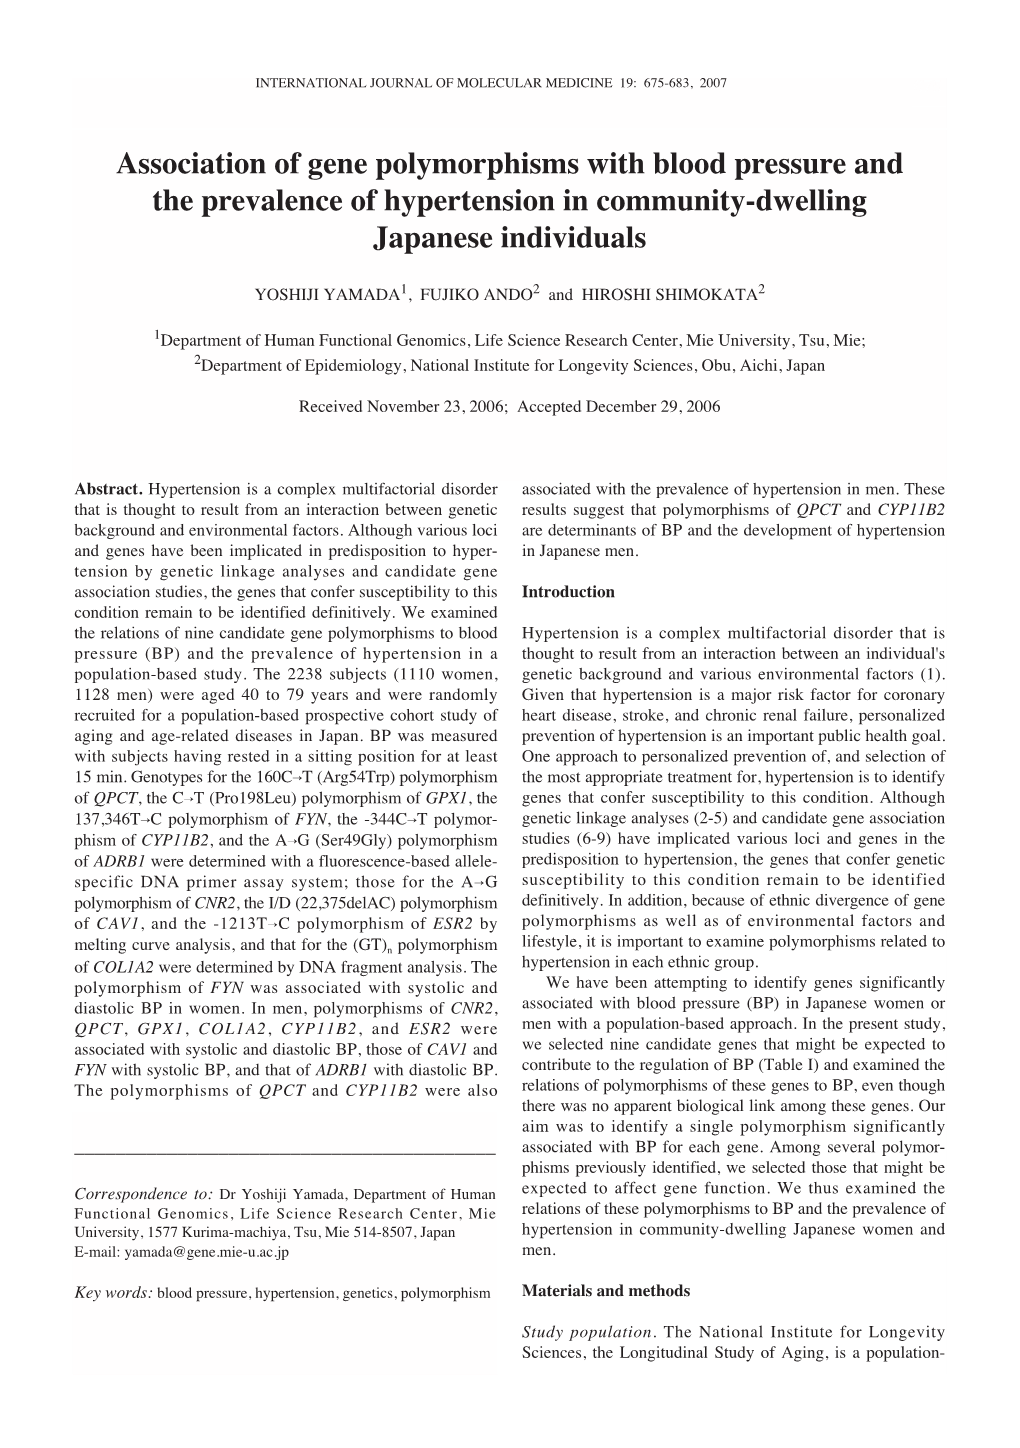 Association of Gene Polymorphisms with Blood Pressure and the Prevalence of Hypertension in Community-Dwelling Japanese Individuals